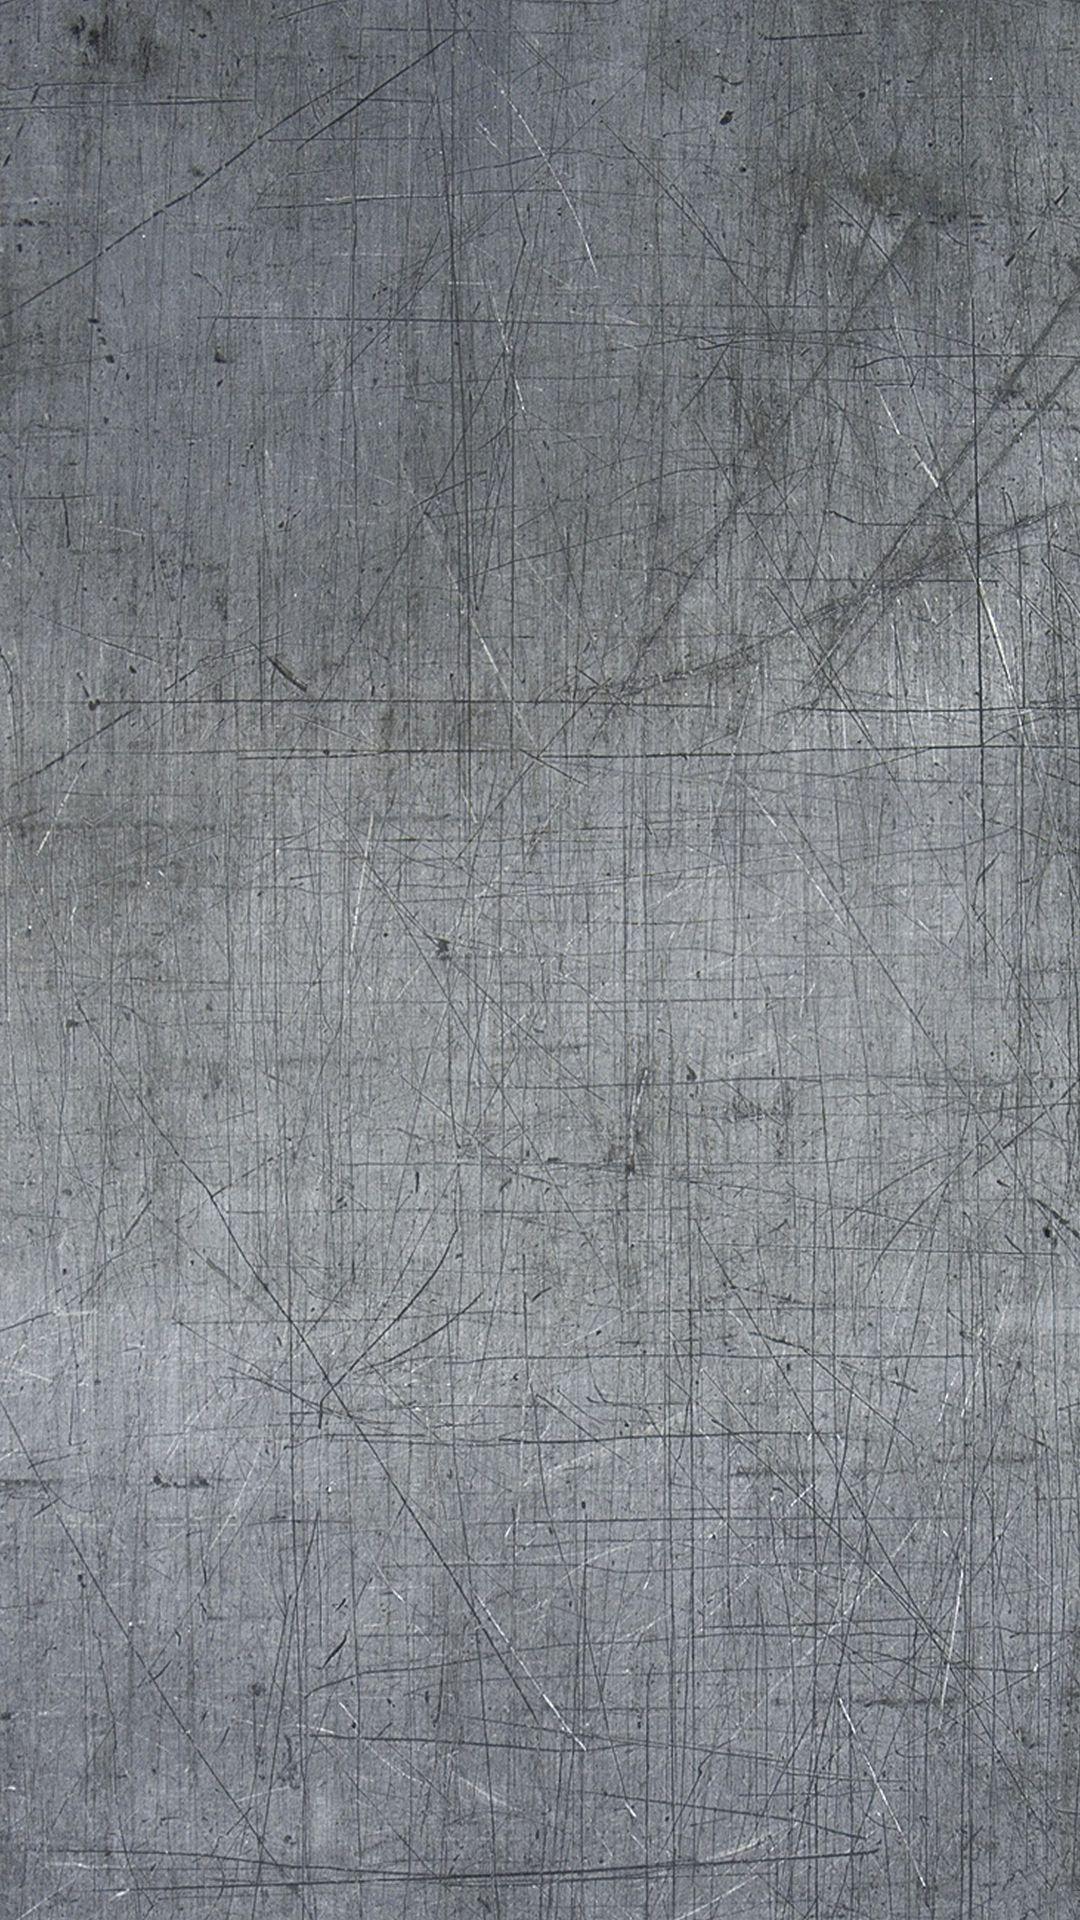 Scratched Gray Metal Surface Android Wallpaper free download